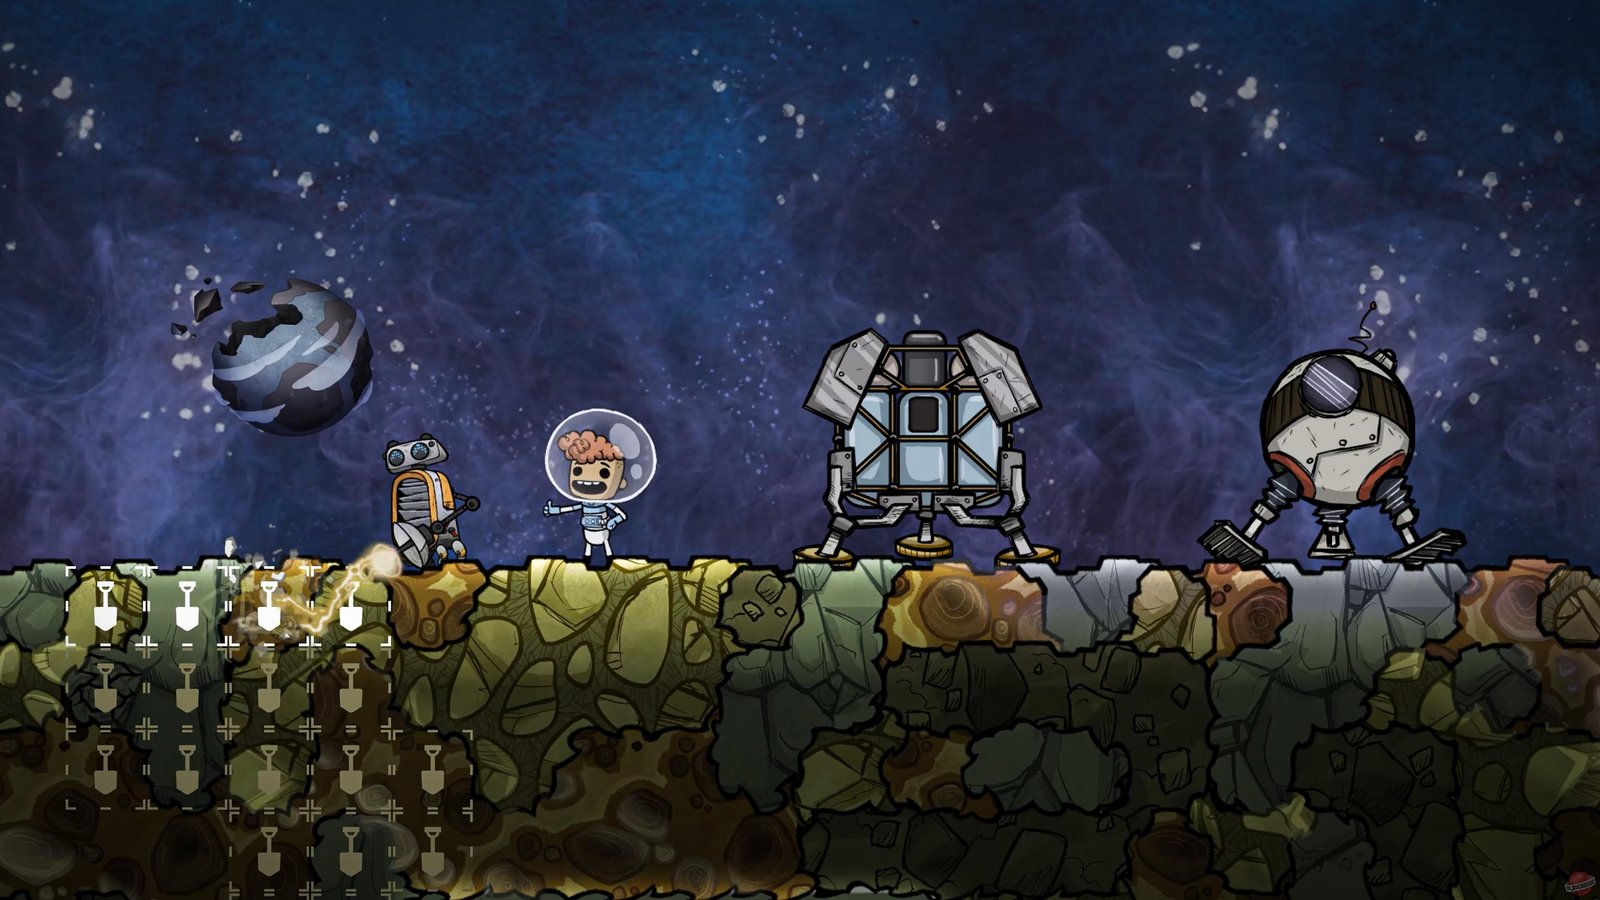 Oxygen Not Included - Spaced Out!